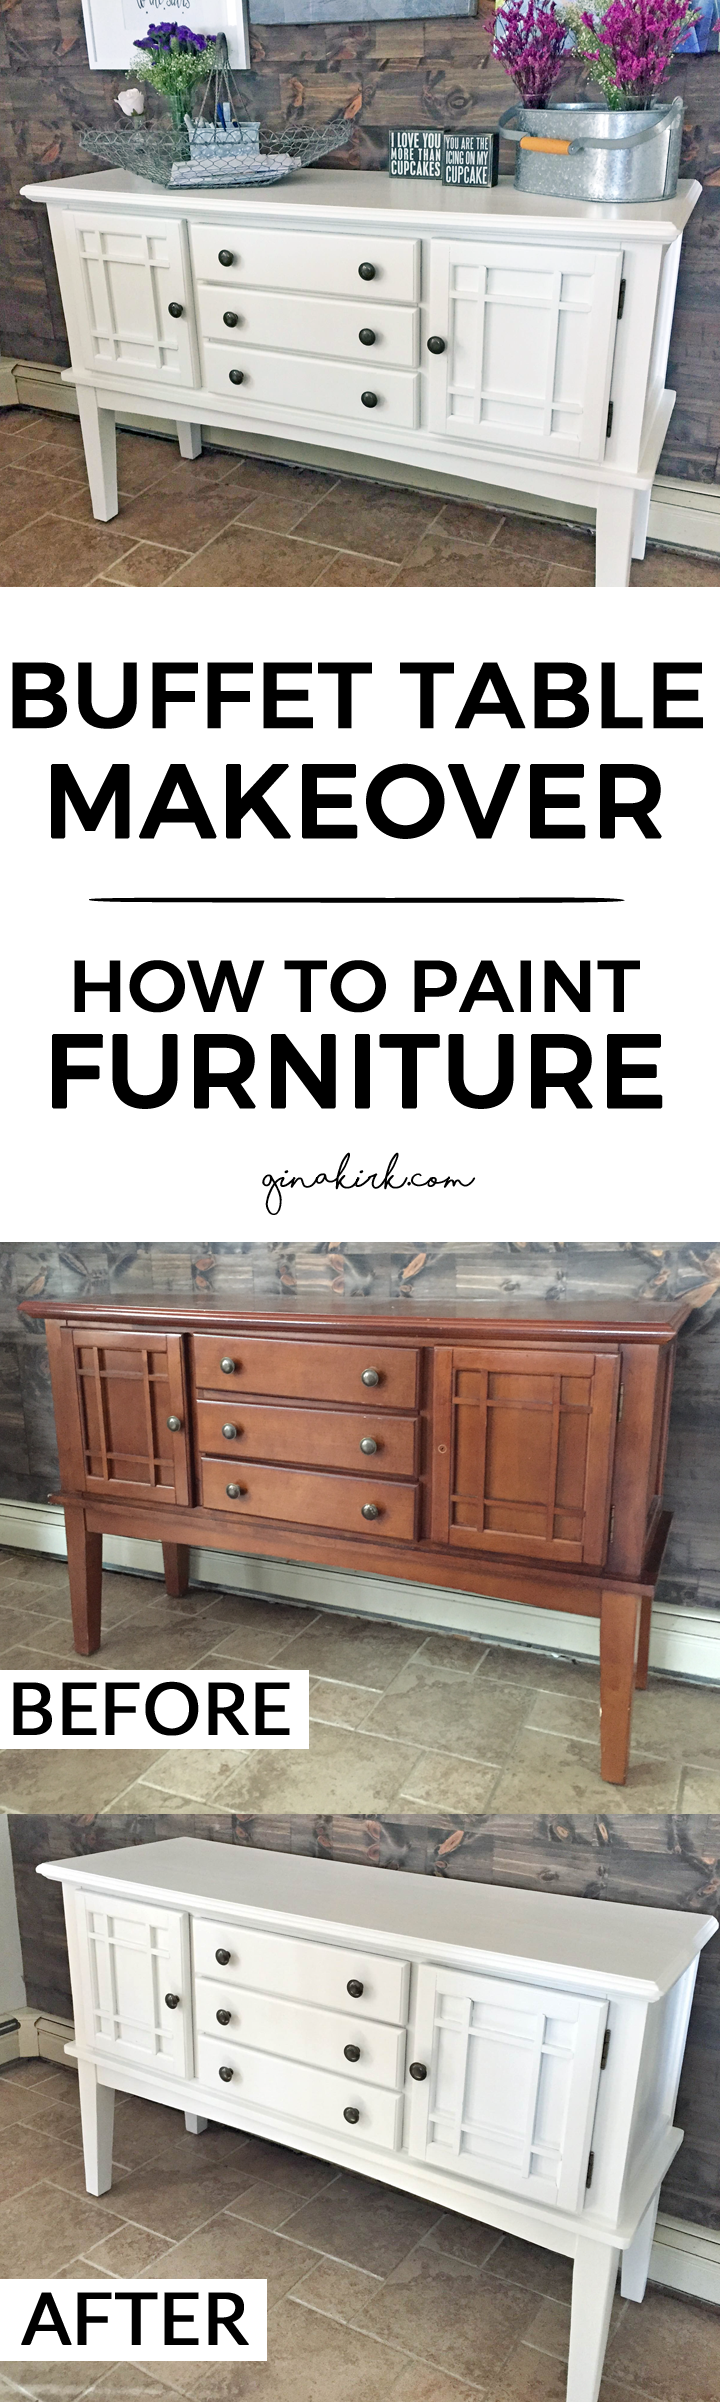 Buffet table makeover | How to paint furniture | The best furniture primer | Refinishing furniture easily | GinaKirk.com @ginaekirk